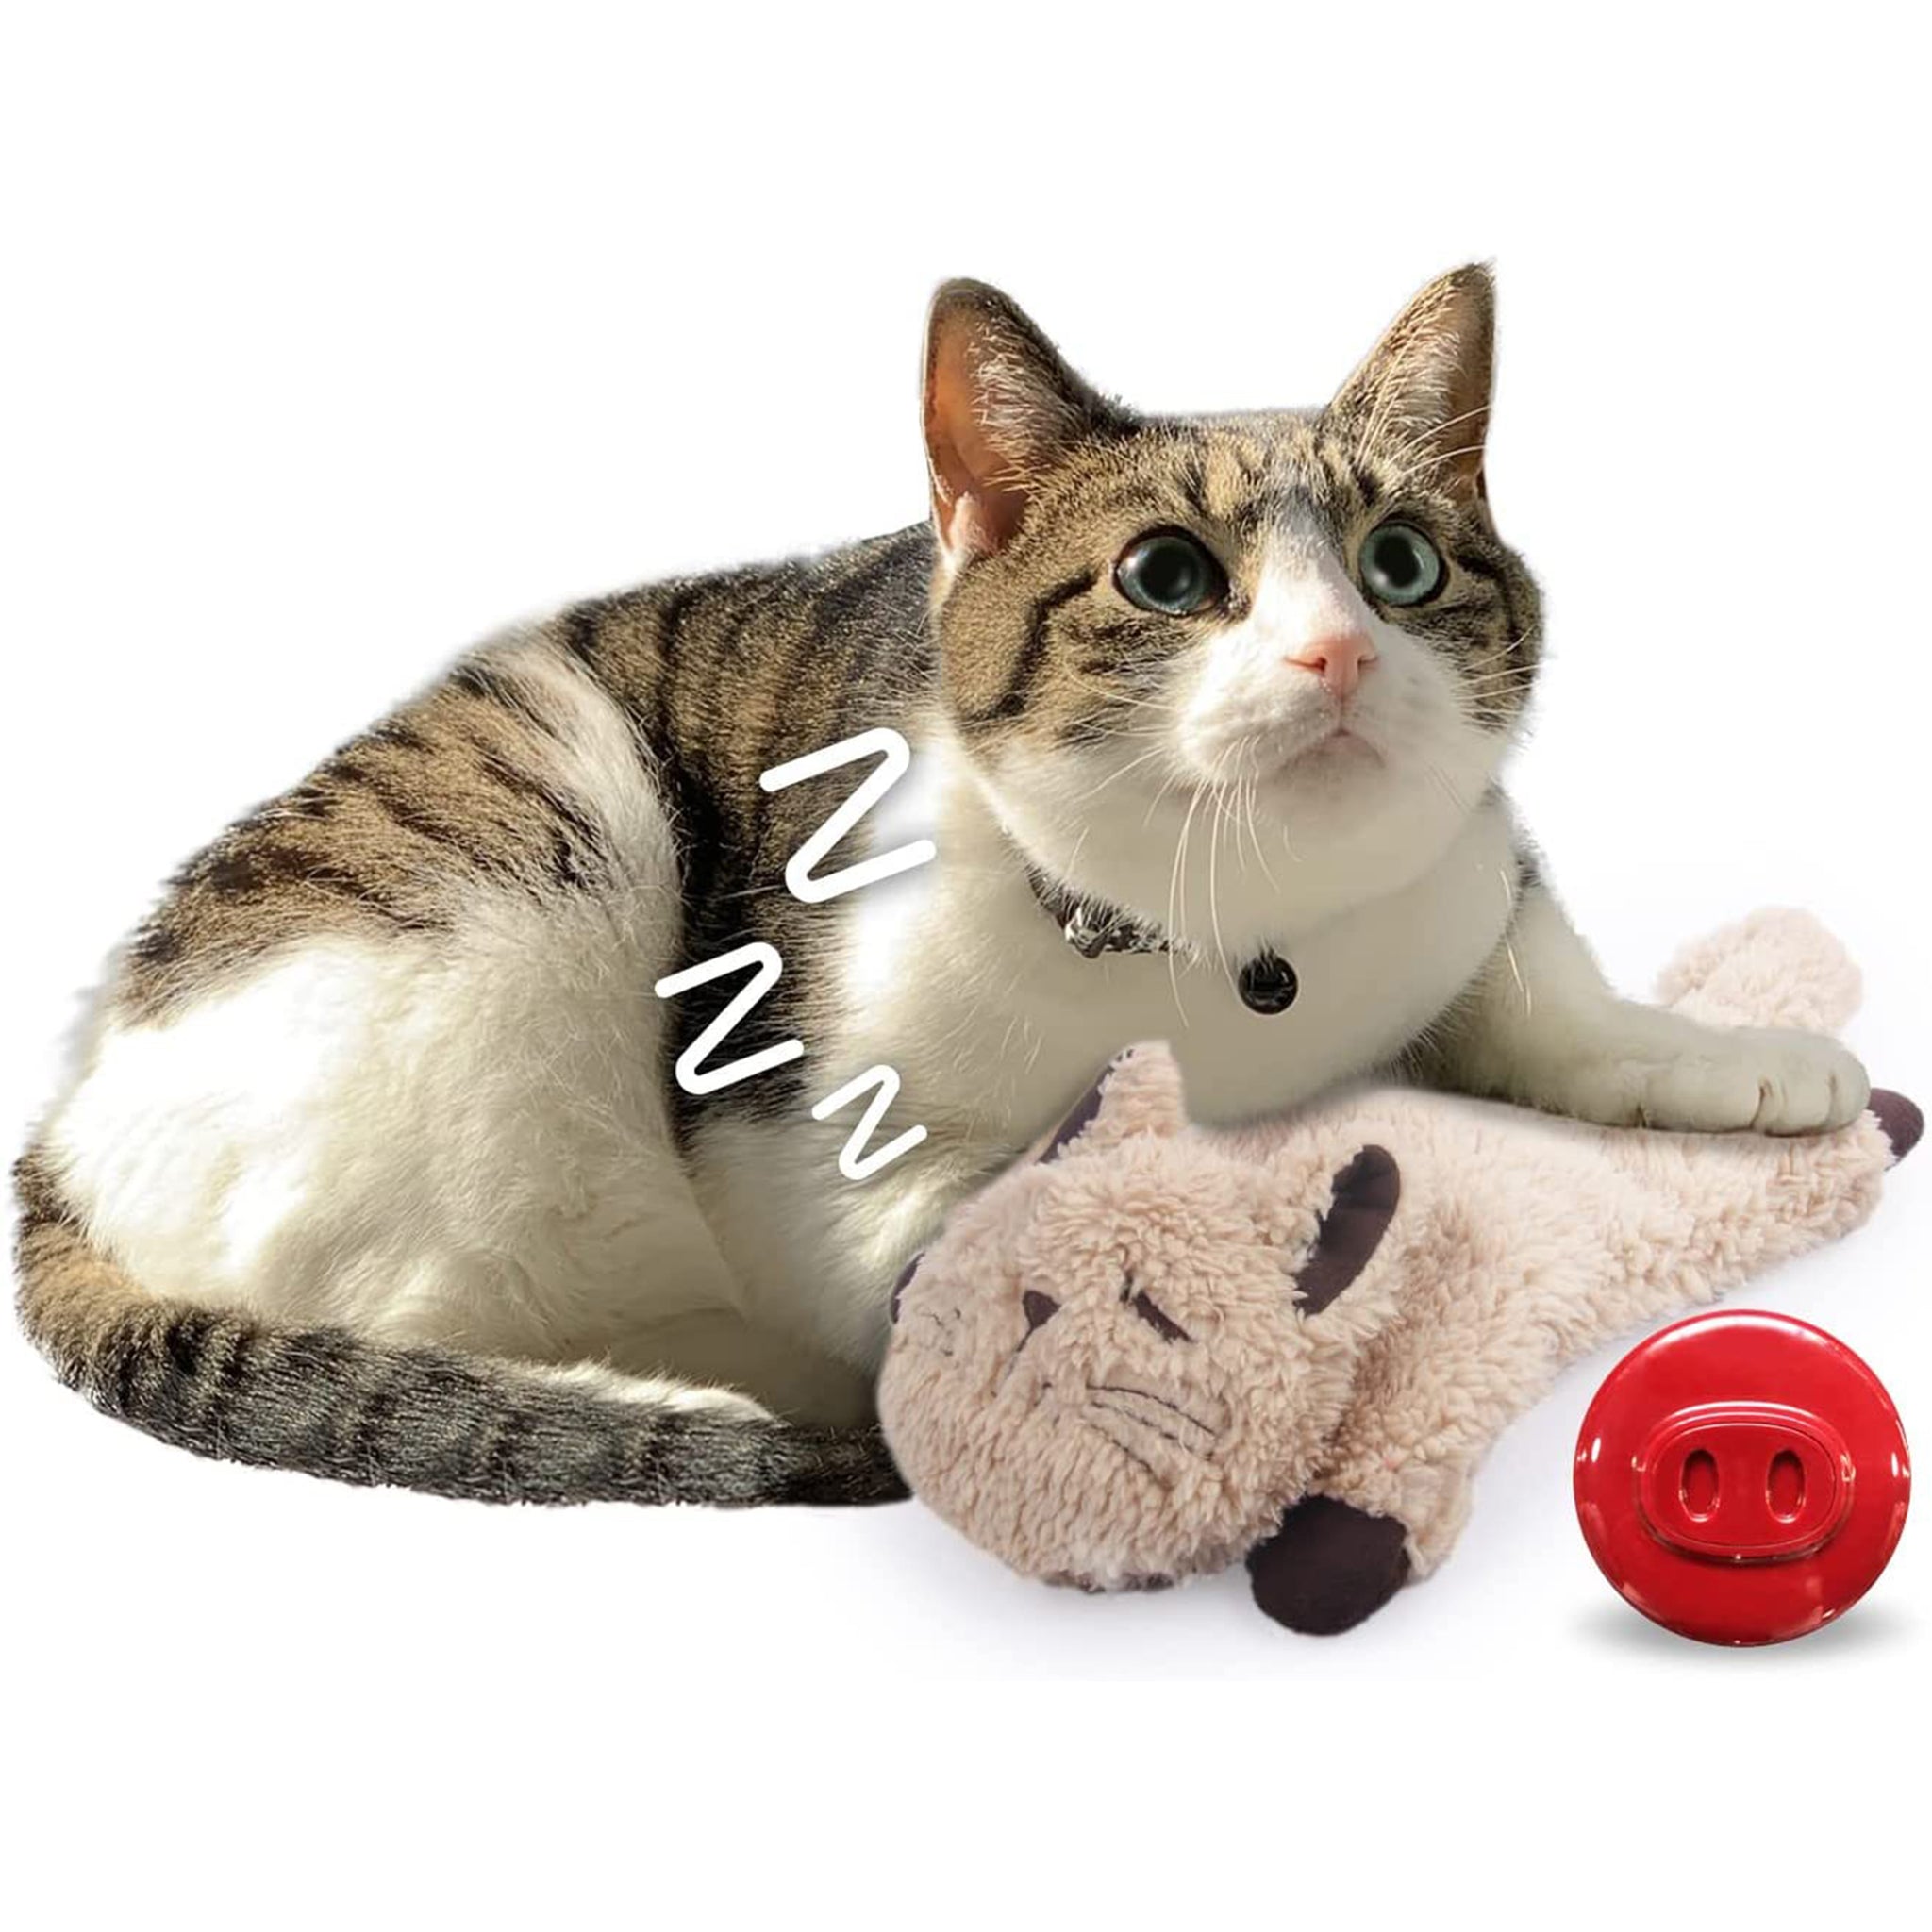 All For Paws Snoring Cuddler (Cat) Purr Sound Calming Plush Cat Toy